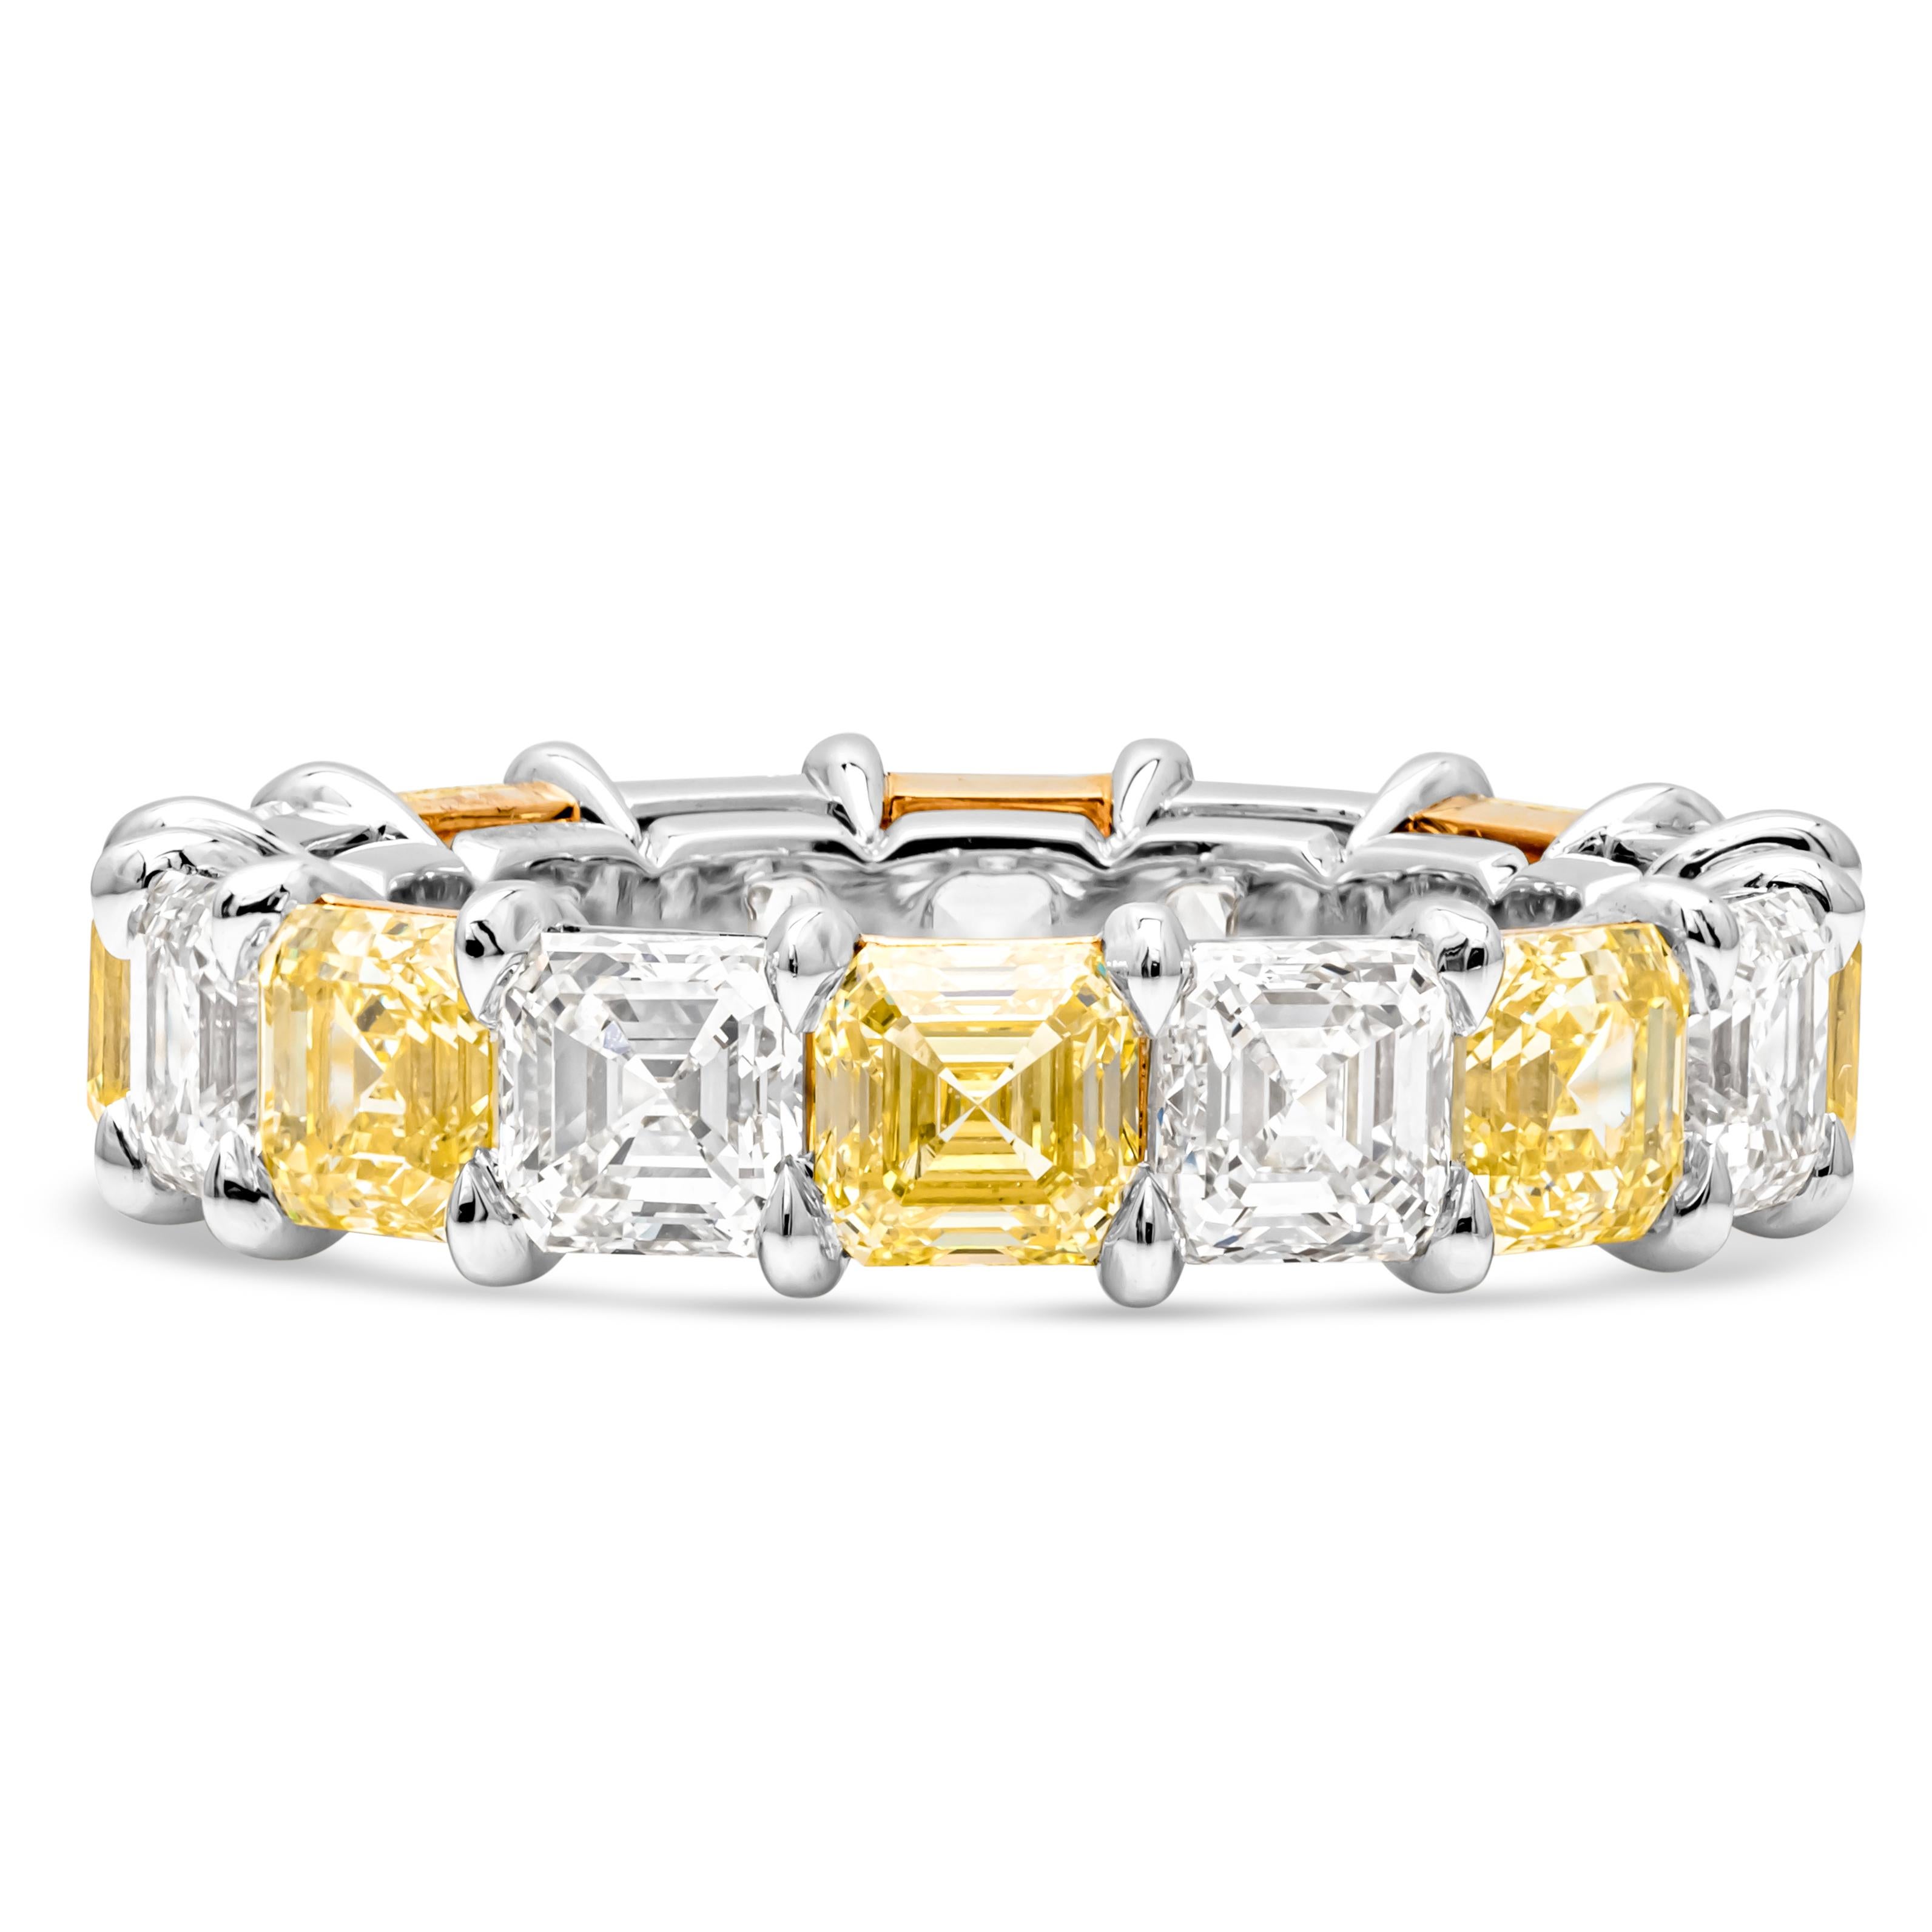 This wedding band features 8 Fancy Yellow and 8 White Asscher Cut Diamonds alternating. Yellow Diamonds weigh 4.31 carats and White diamonds weight 3.69 carats total and F in  color and VS in Clarity. Set in 18K Yellow Gold and Platinum Size 6